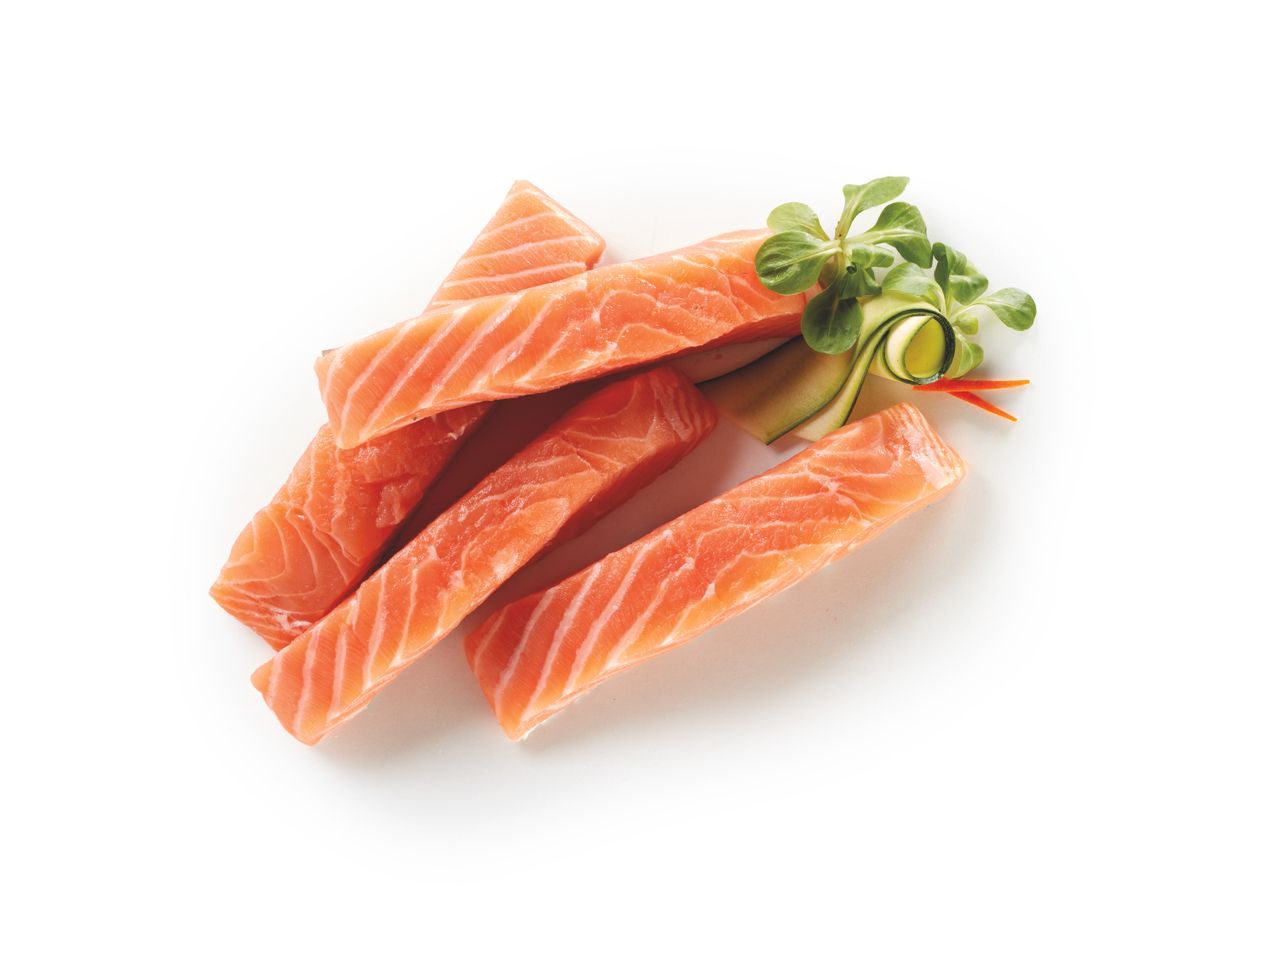 Go to full screen view: Salmon Fillet with Skin - Image 1